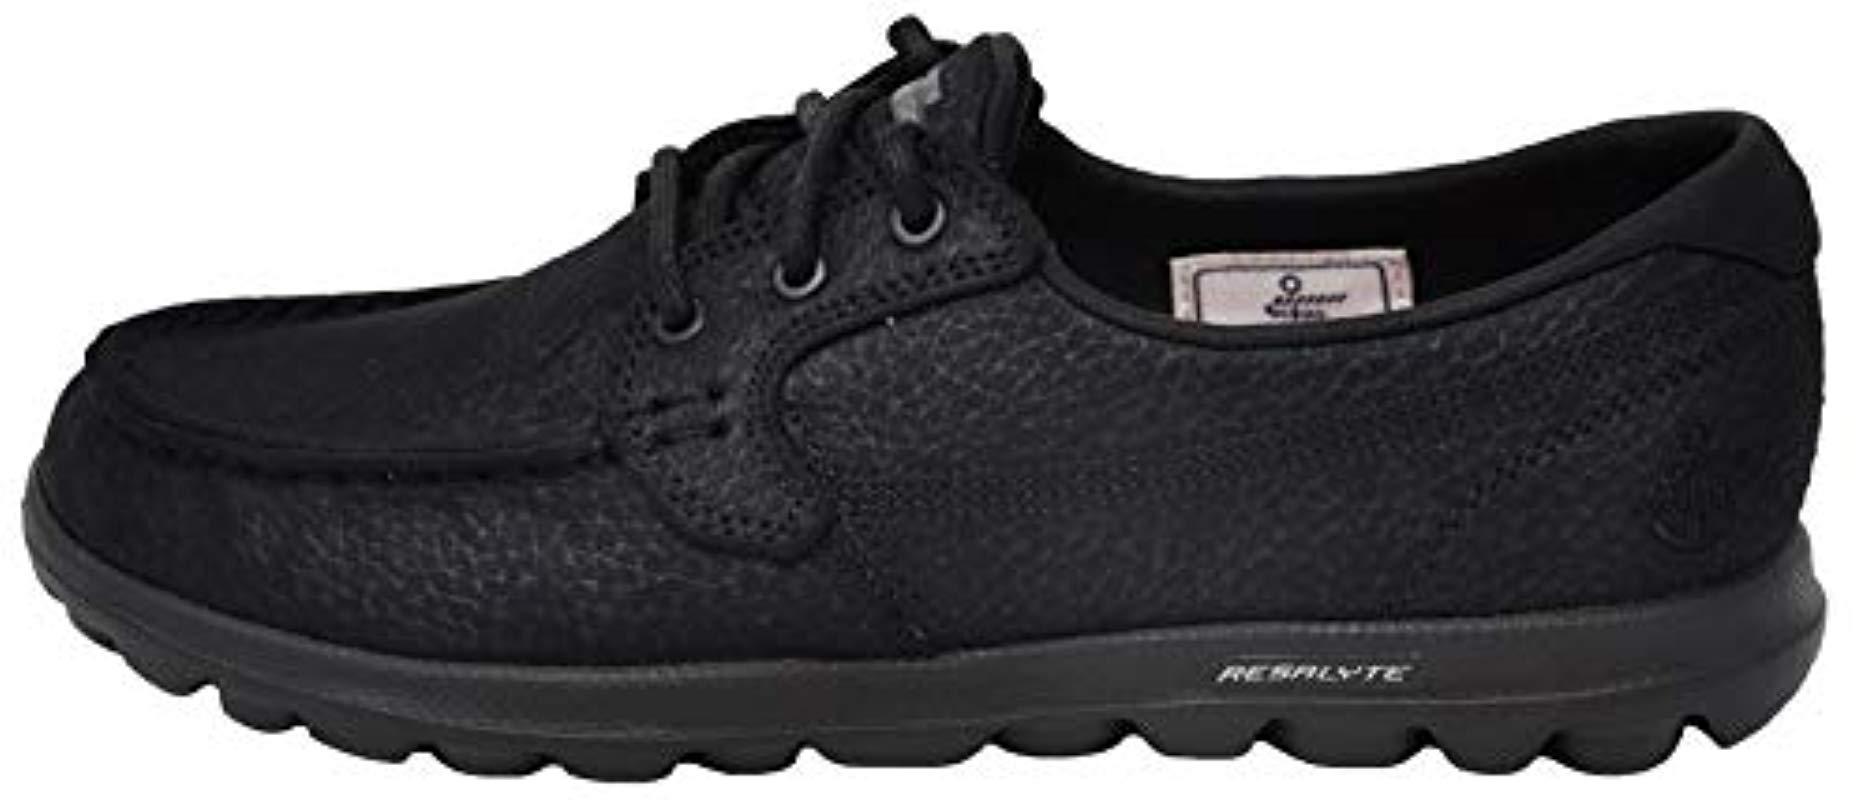 skechers on the go boat shoes black